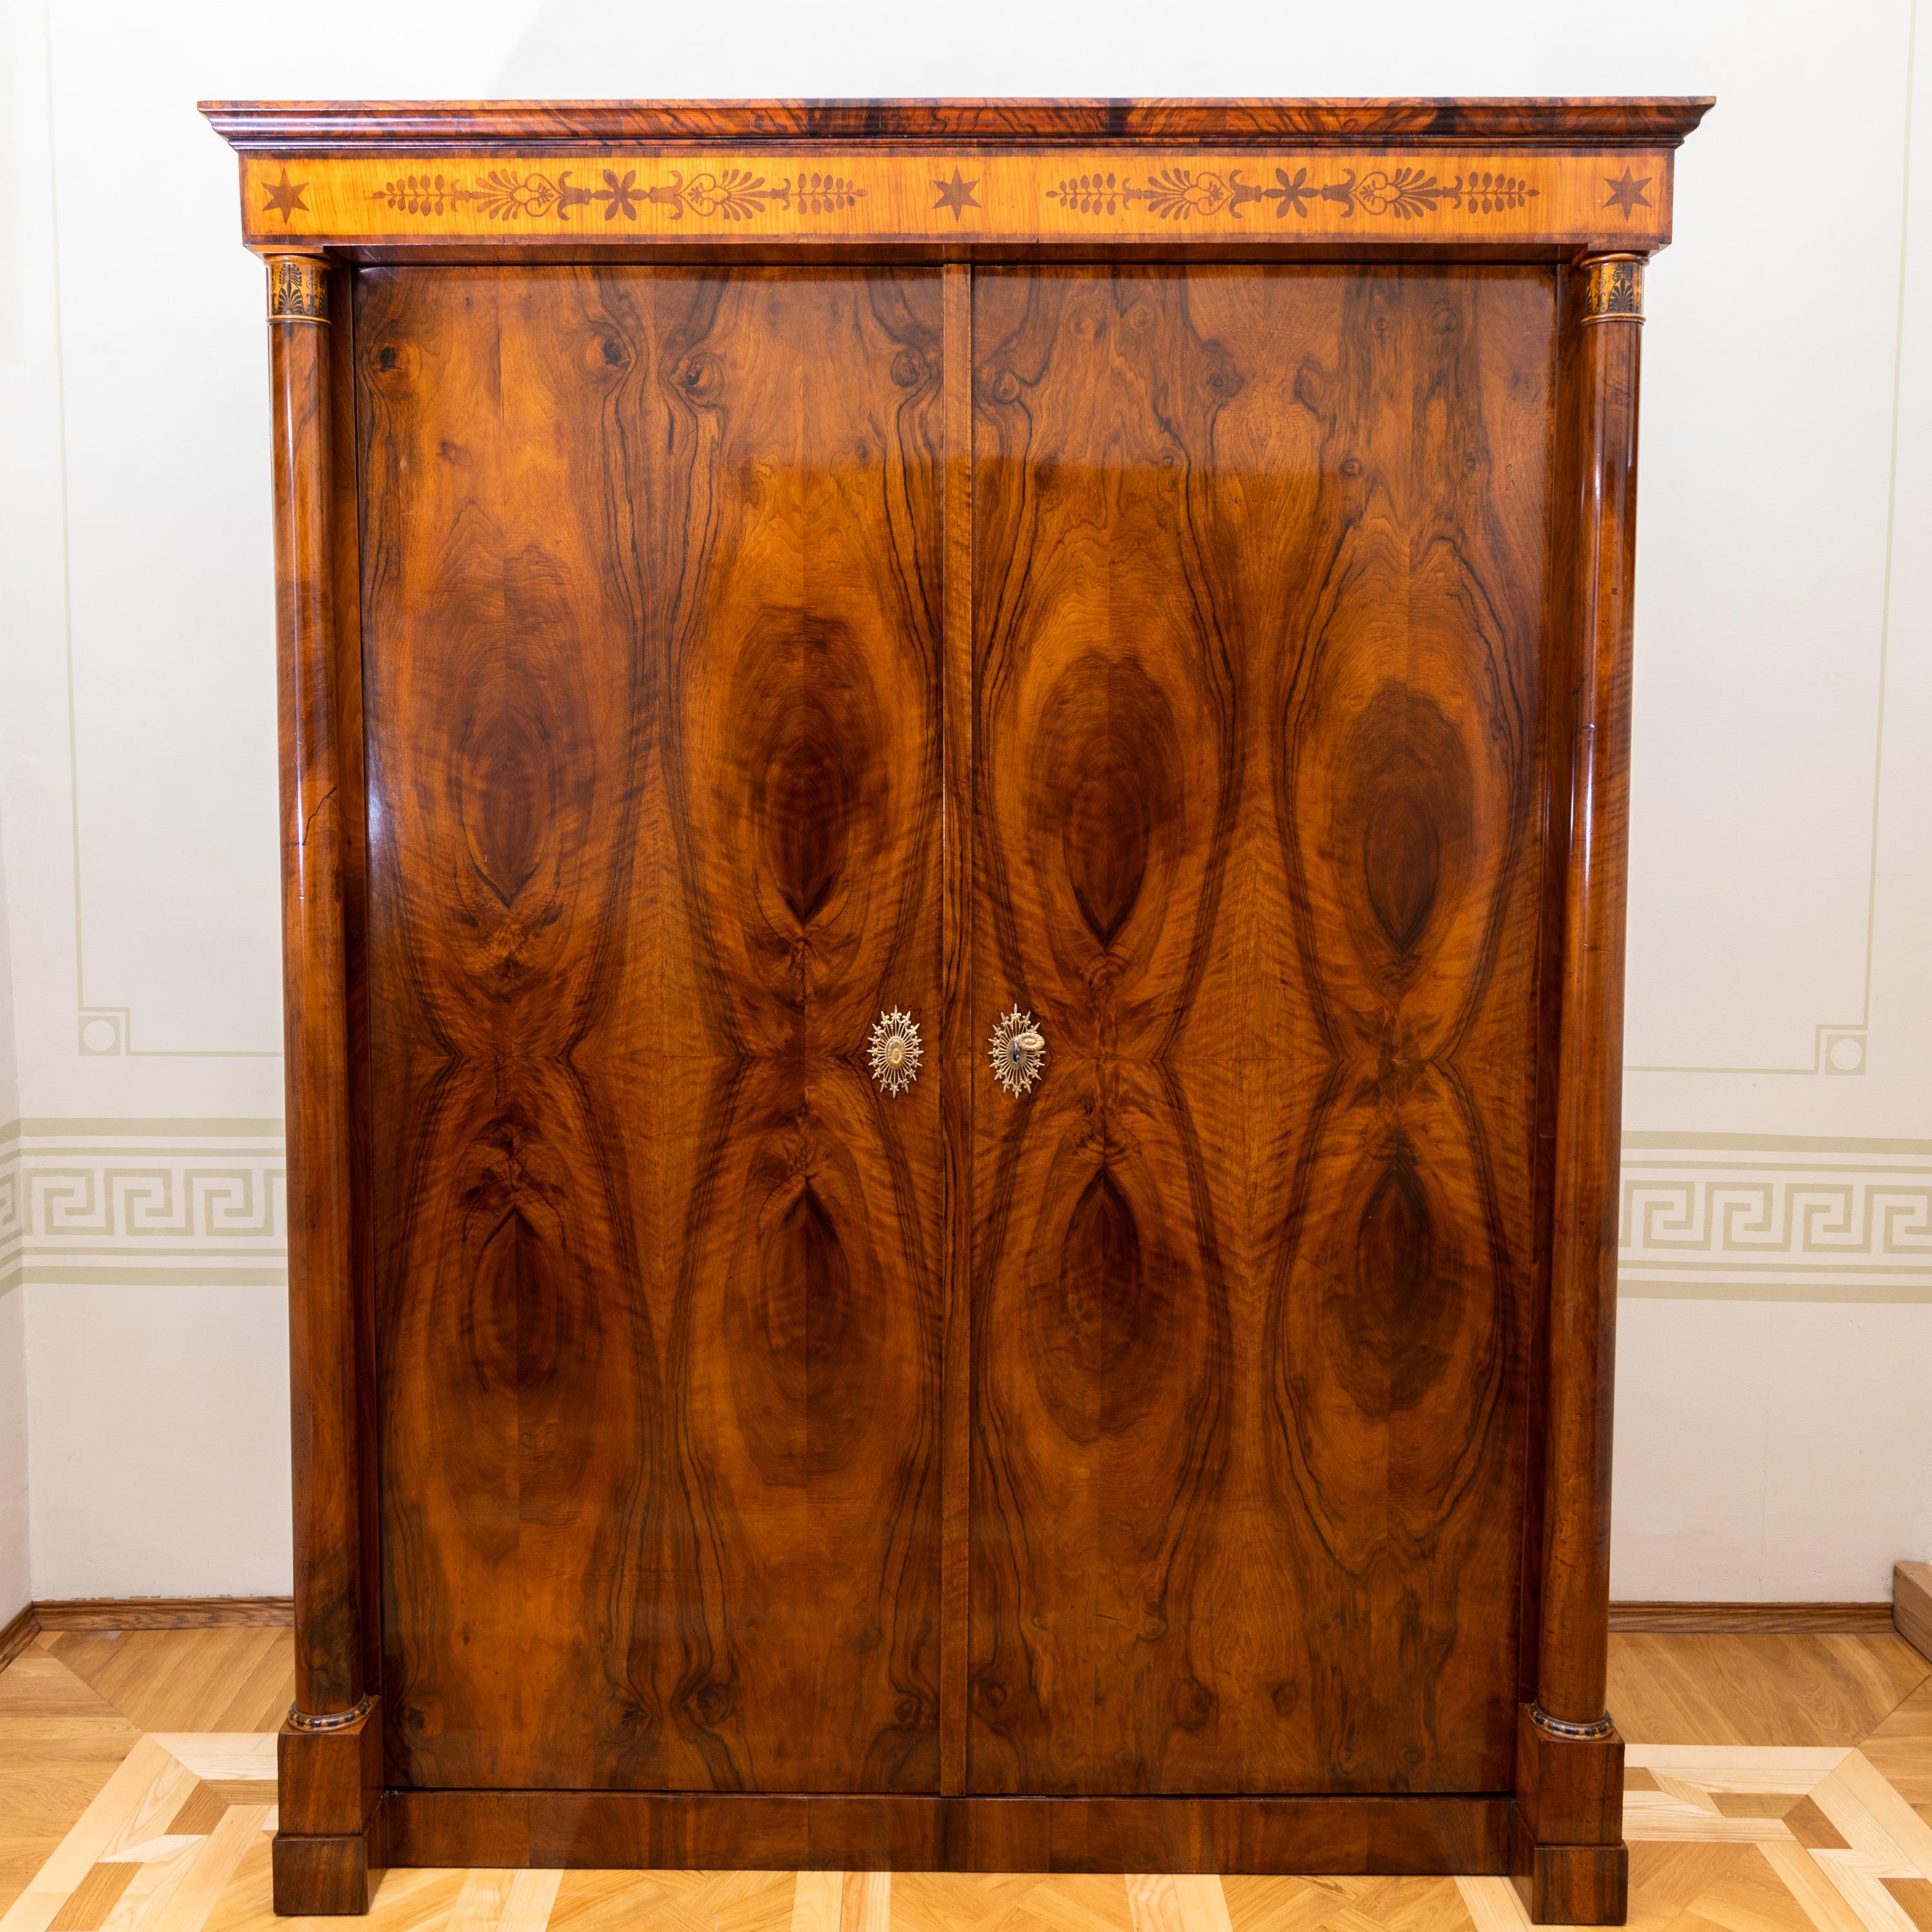 Empire cabinet with two doors, in solid and veneered walnut. The strict corpus is flanked by columns with floral ink painting on the capitals and bases. The straight profiled cornice with inlayed ornamental band with palmettes and stars completes